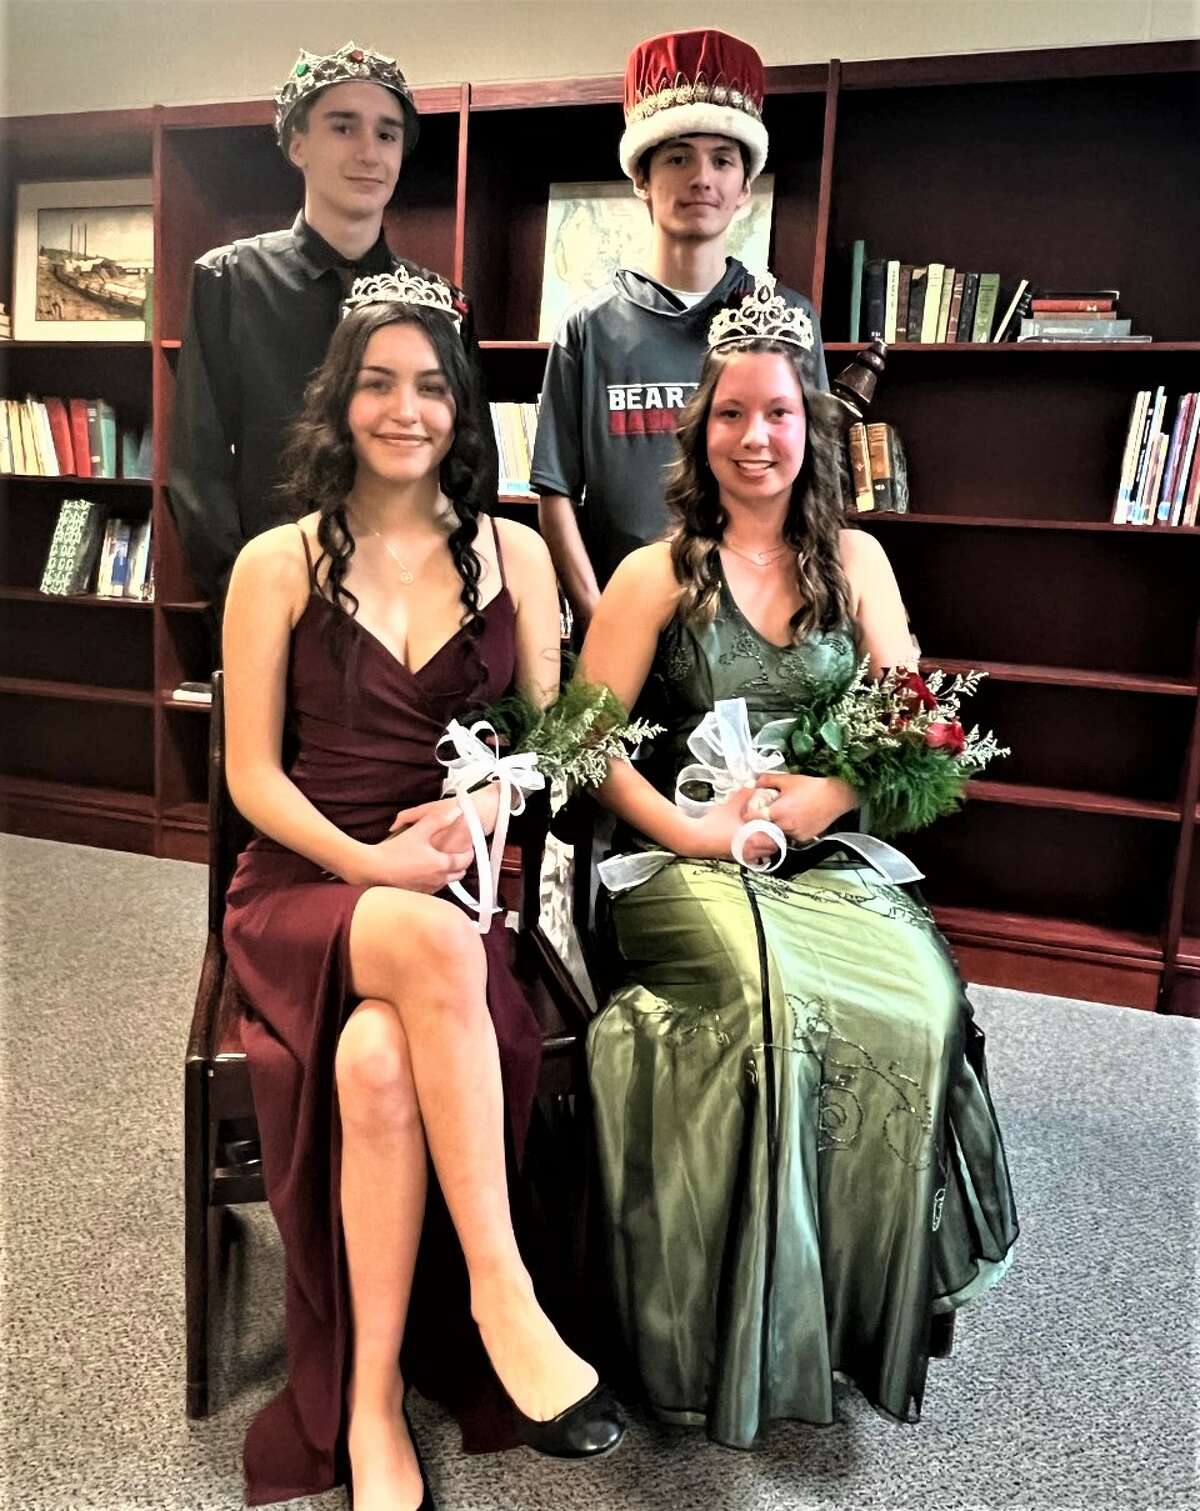 Alexia Rineer and Ethaniel Ruiz were crowned Bear Lake High School's 2023 Homecoming Queen and King Friday evening. Pictured are (front row, from left) Maria Magaña Garcia, homecoming princess, and Rineer; and (back row) Jacob Miller, homecoming prince, and Ruiz.